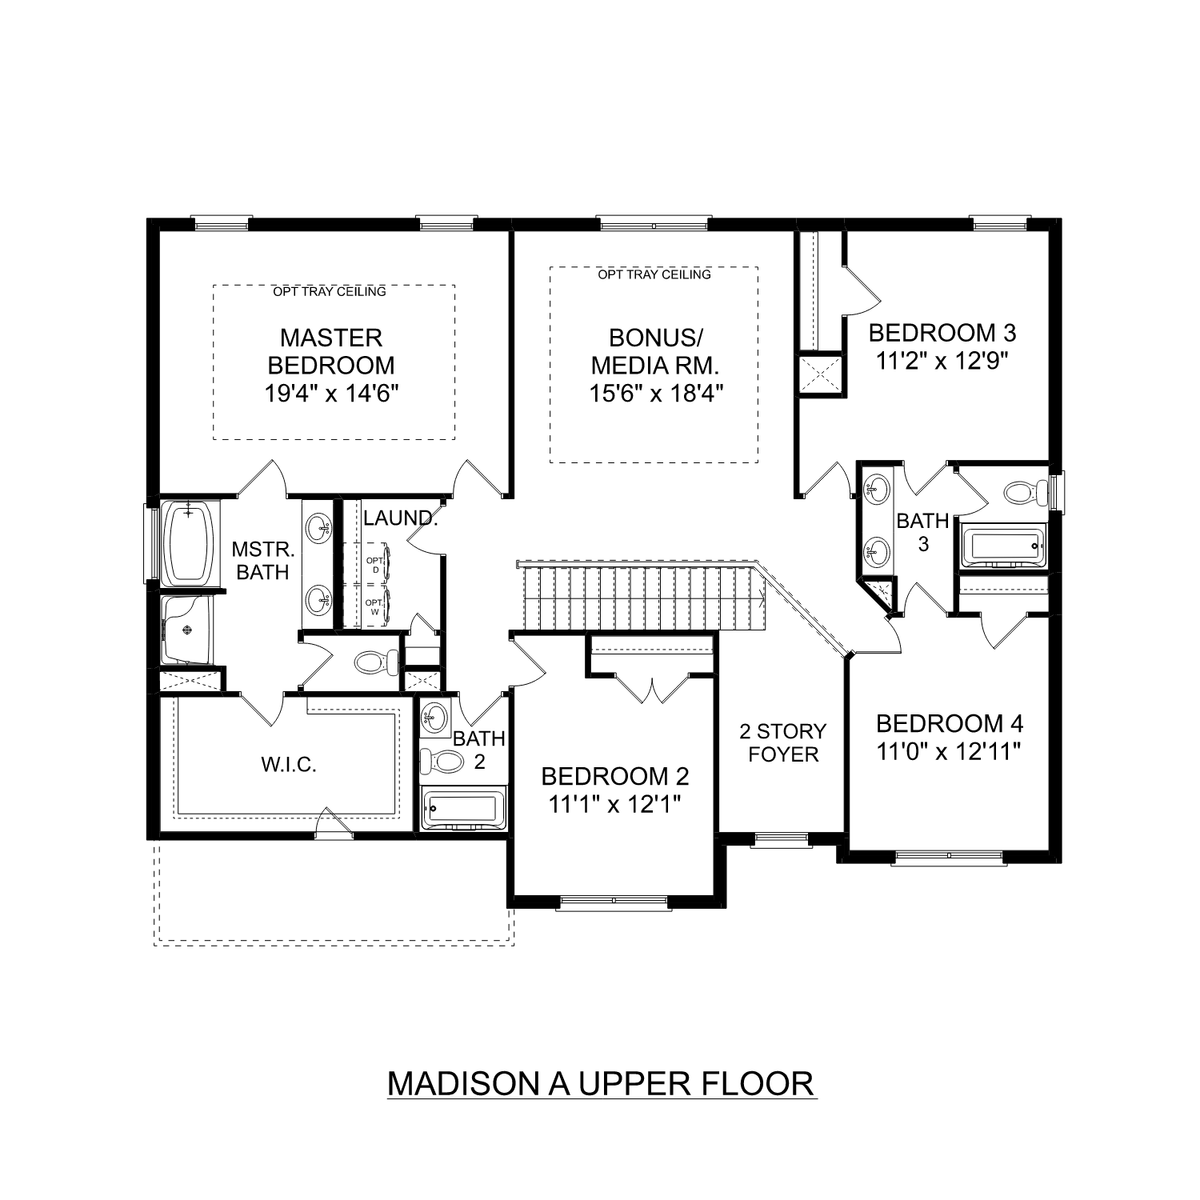 2 - The Madison A floor plan layout for 29512 Limestone Creek Way in Davidson Homes' Creekside community.